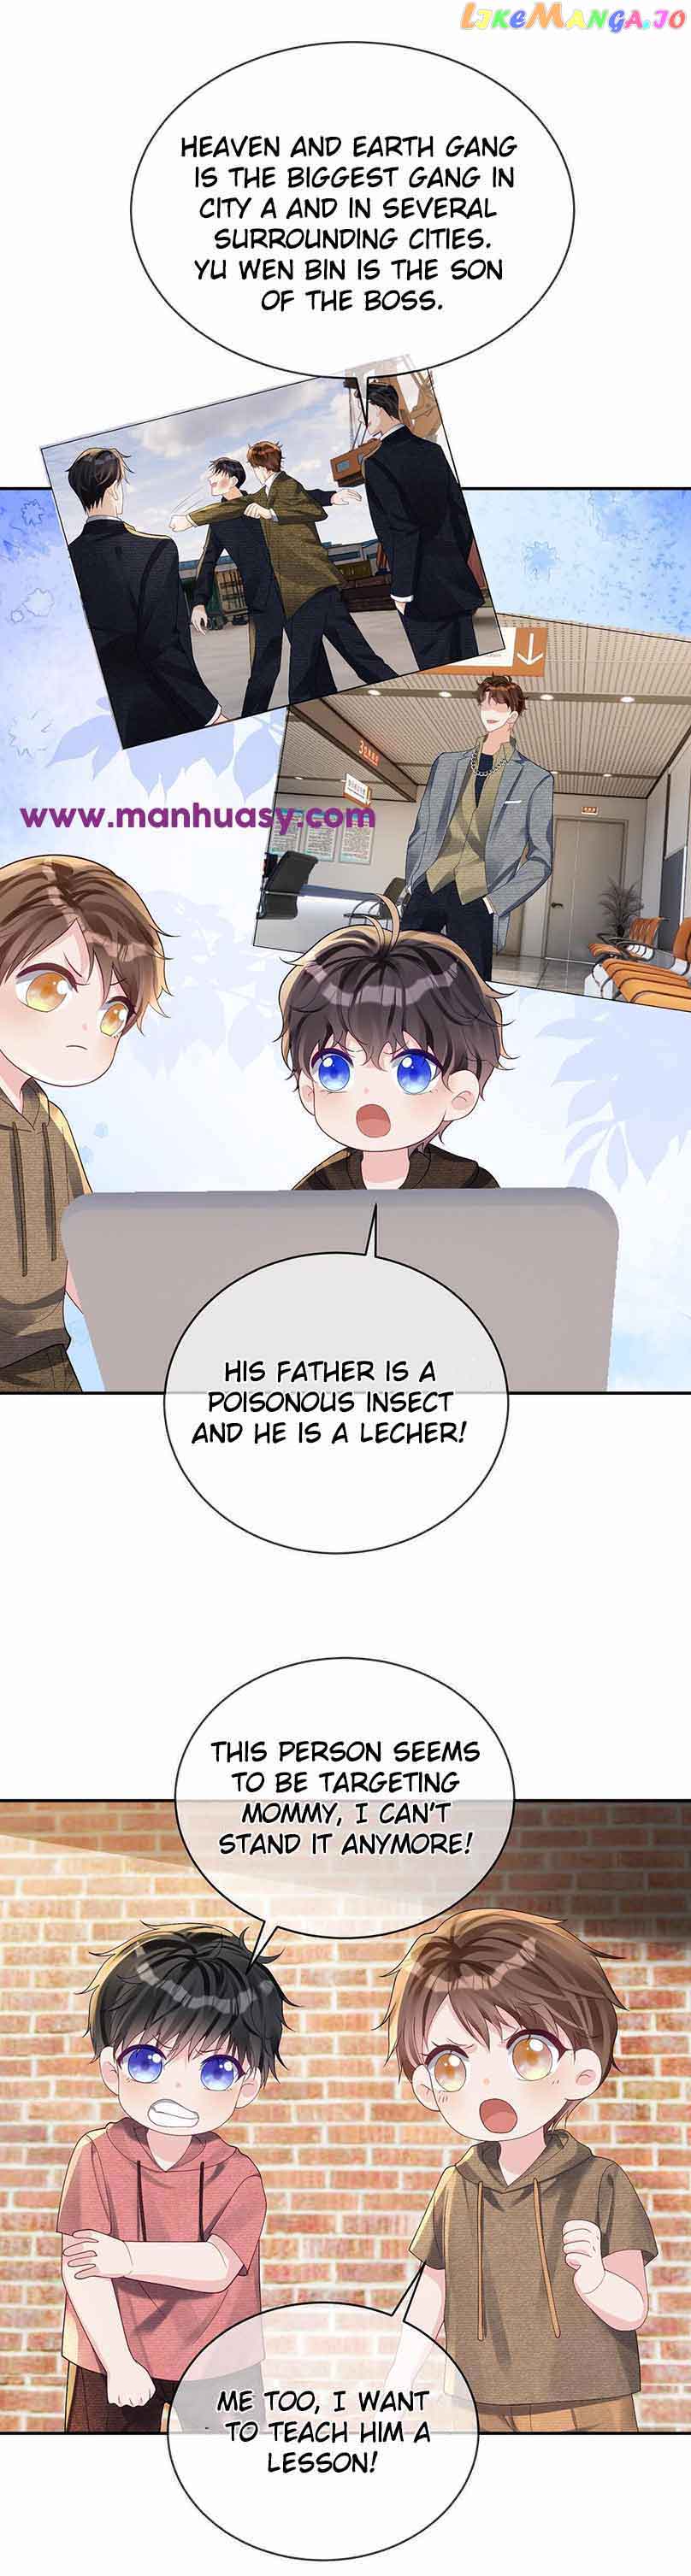 Cute Baby From Heaven: Daddy is Too Strong chapter 60